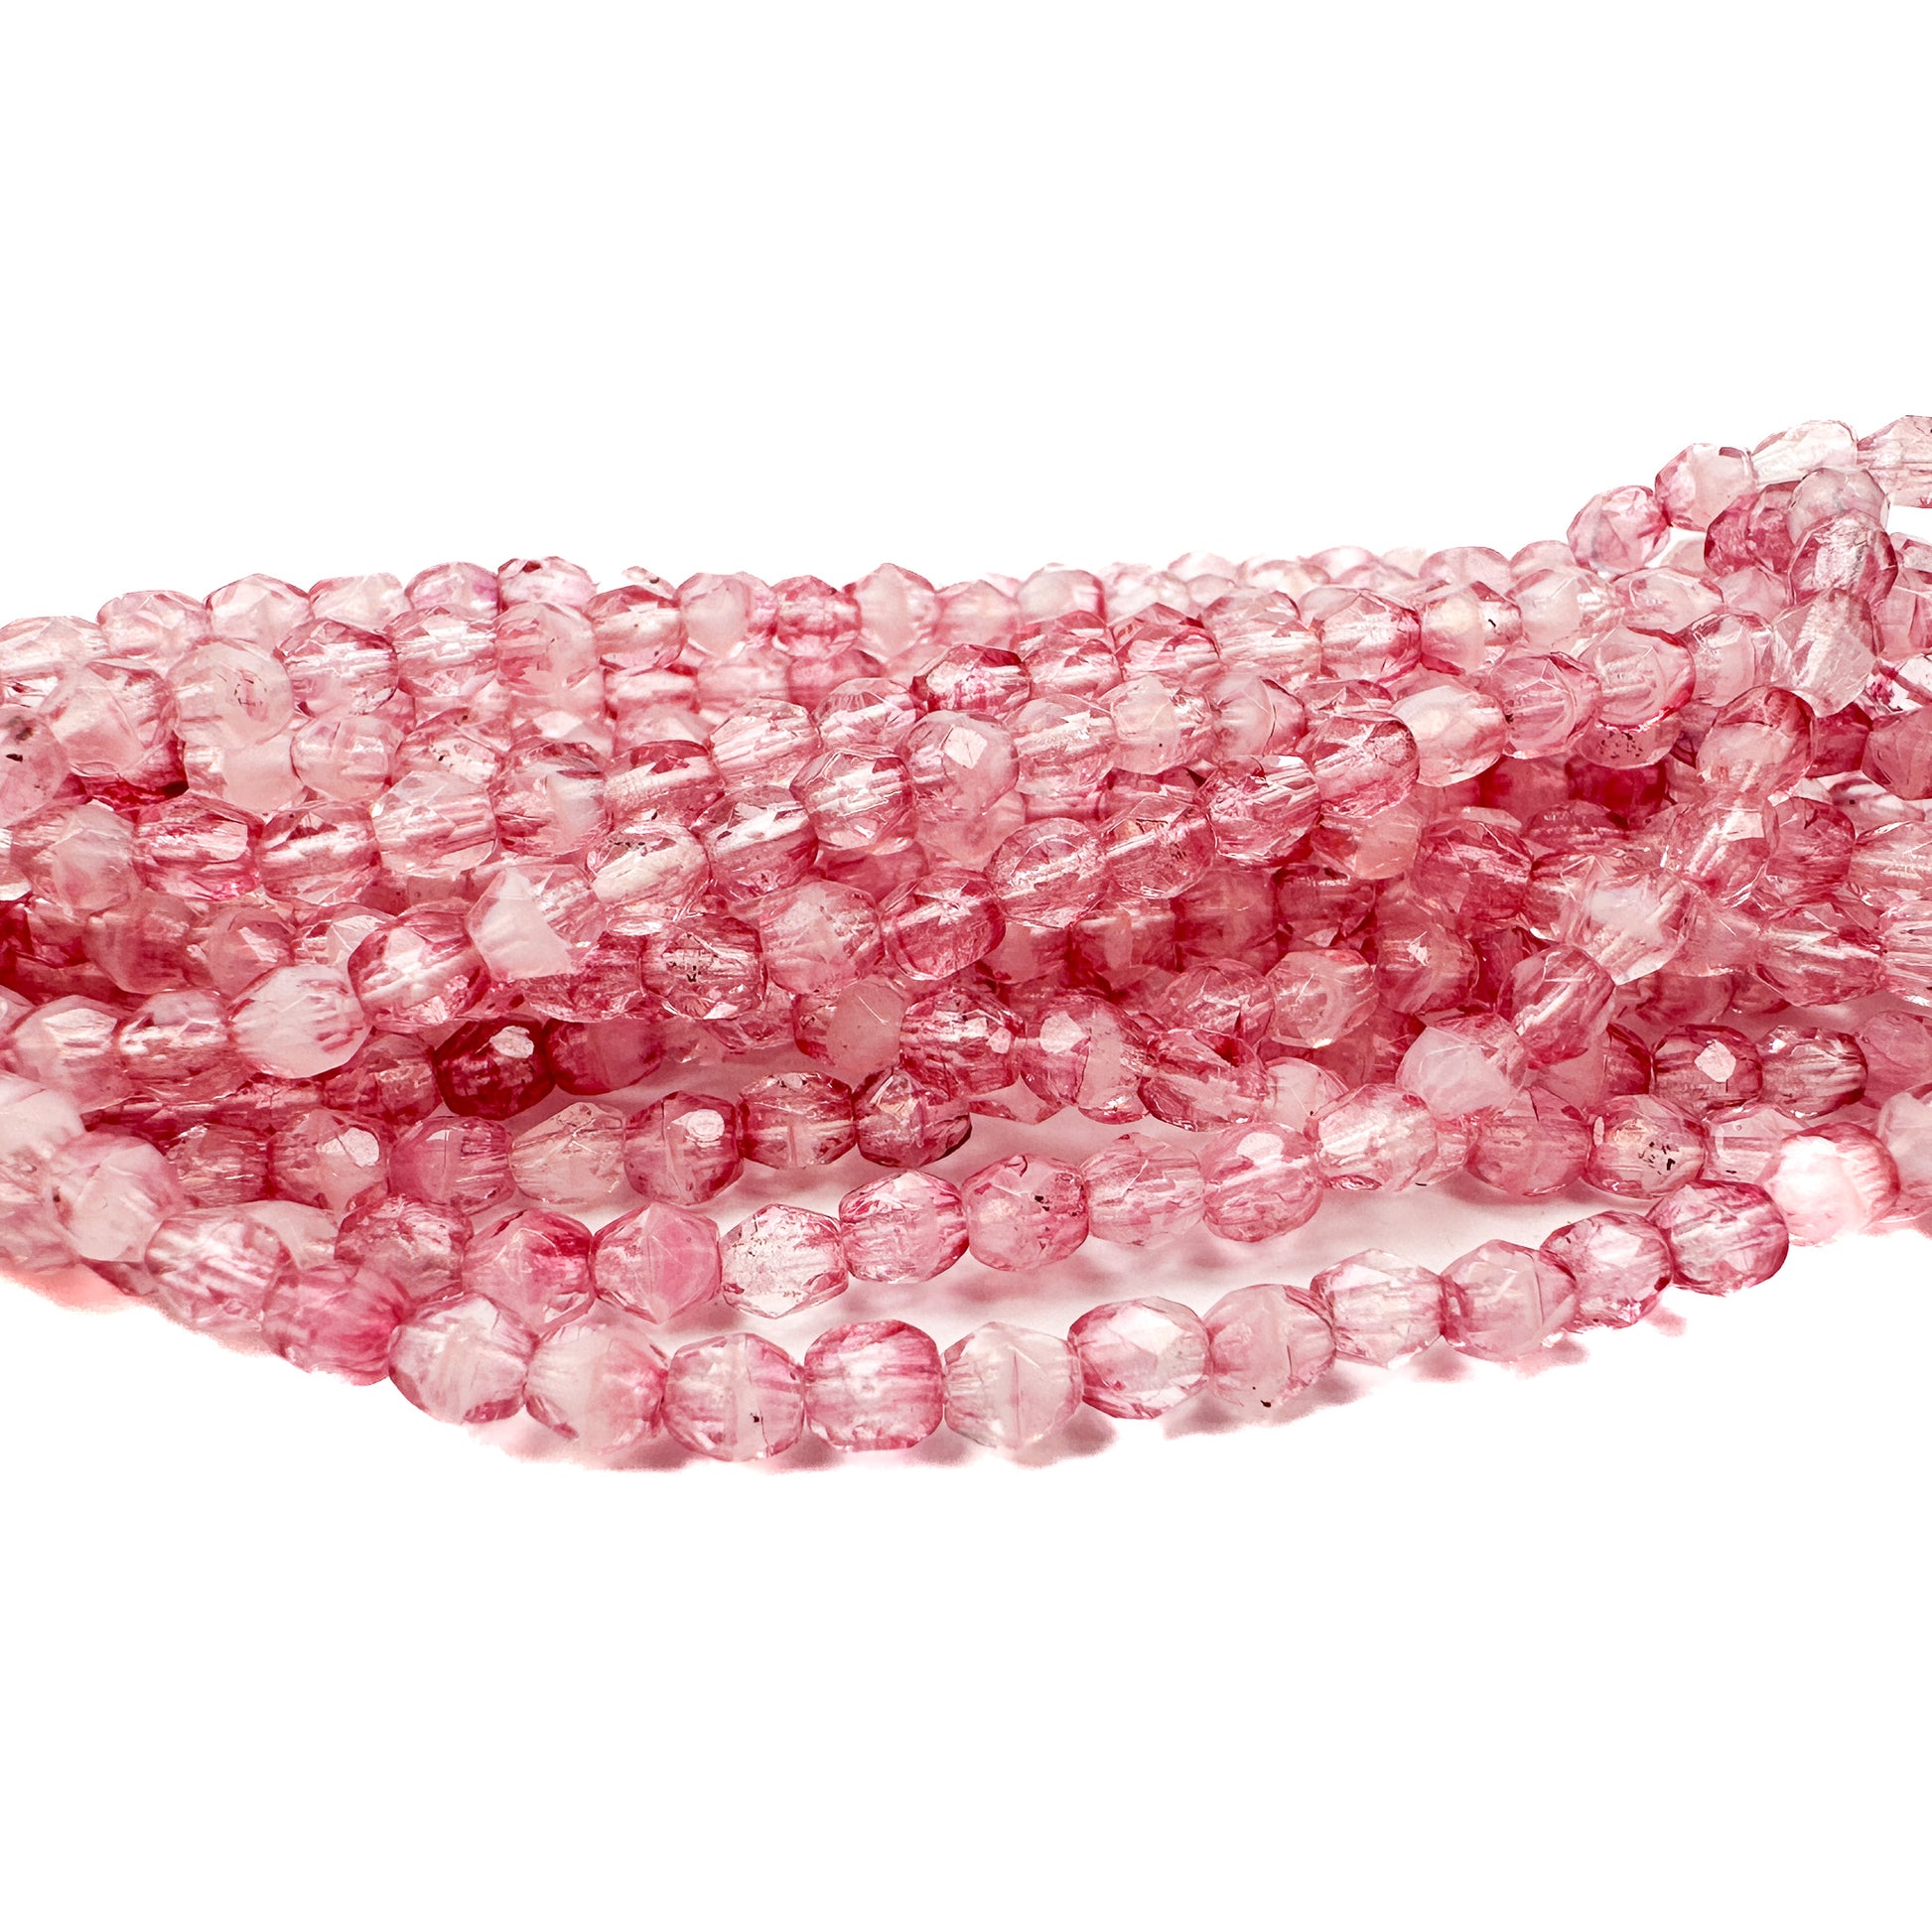 Pink Crystal White Mix Transparent 4mm Faceted Glass Bead - 50 pcs.-The Bead Gallery Honolulu